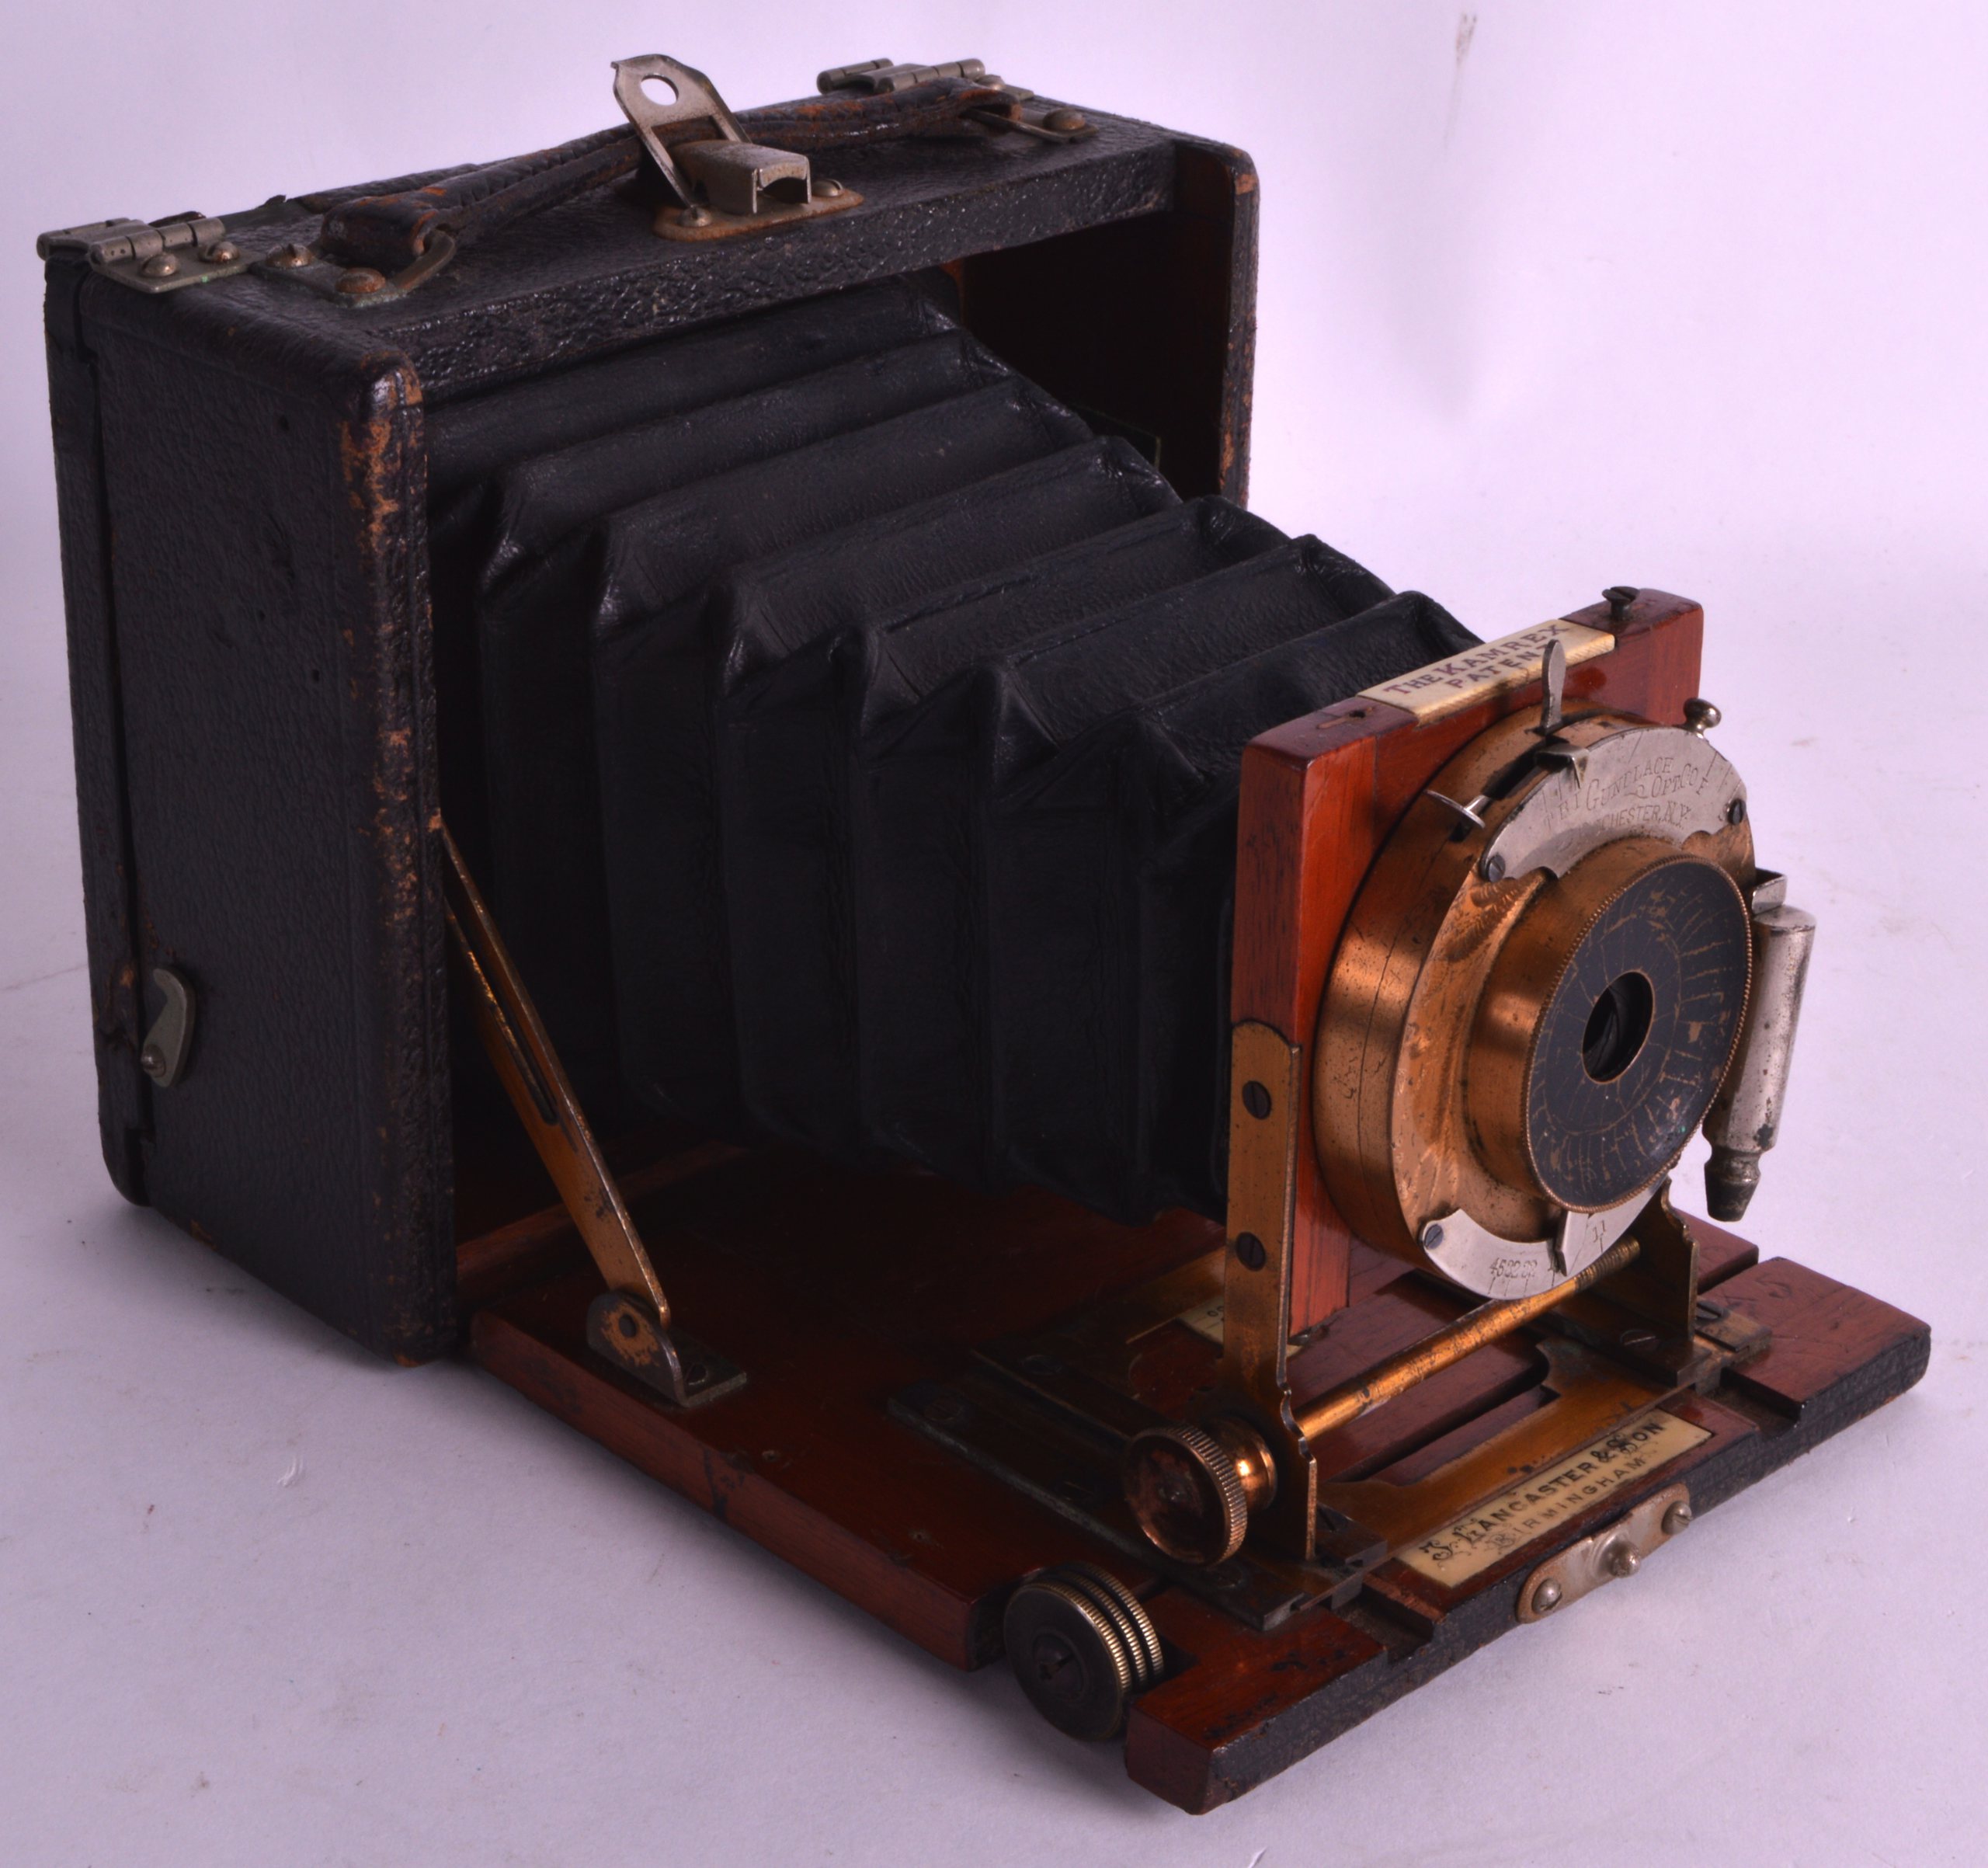 A LATE 19TH CENTURY 'KAMREX PATENT' CAMERA retailed by S Lancaster and Son of Birmingham. Case 5.